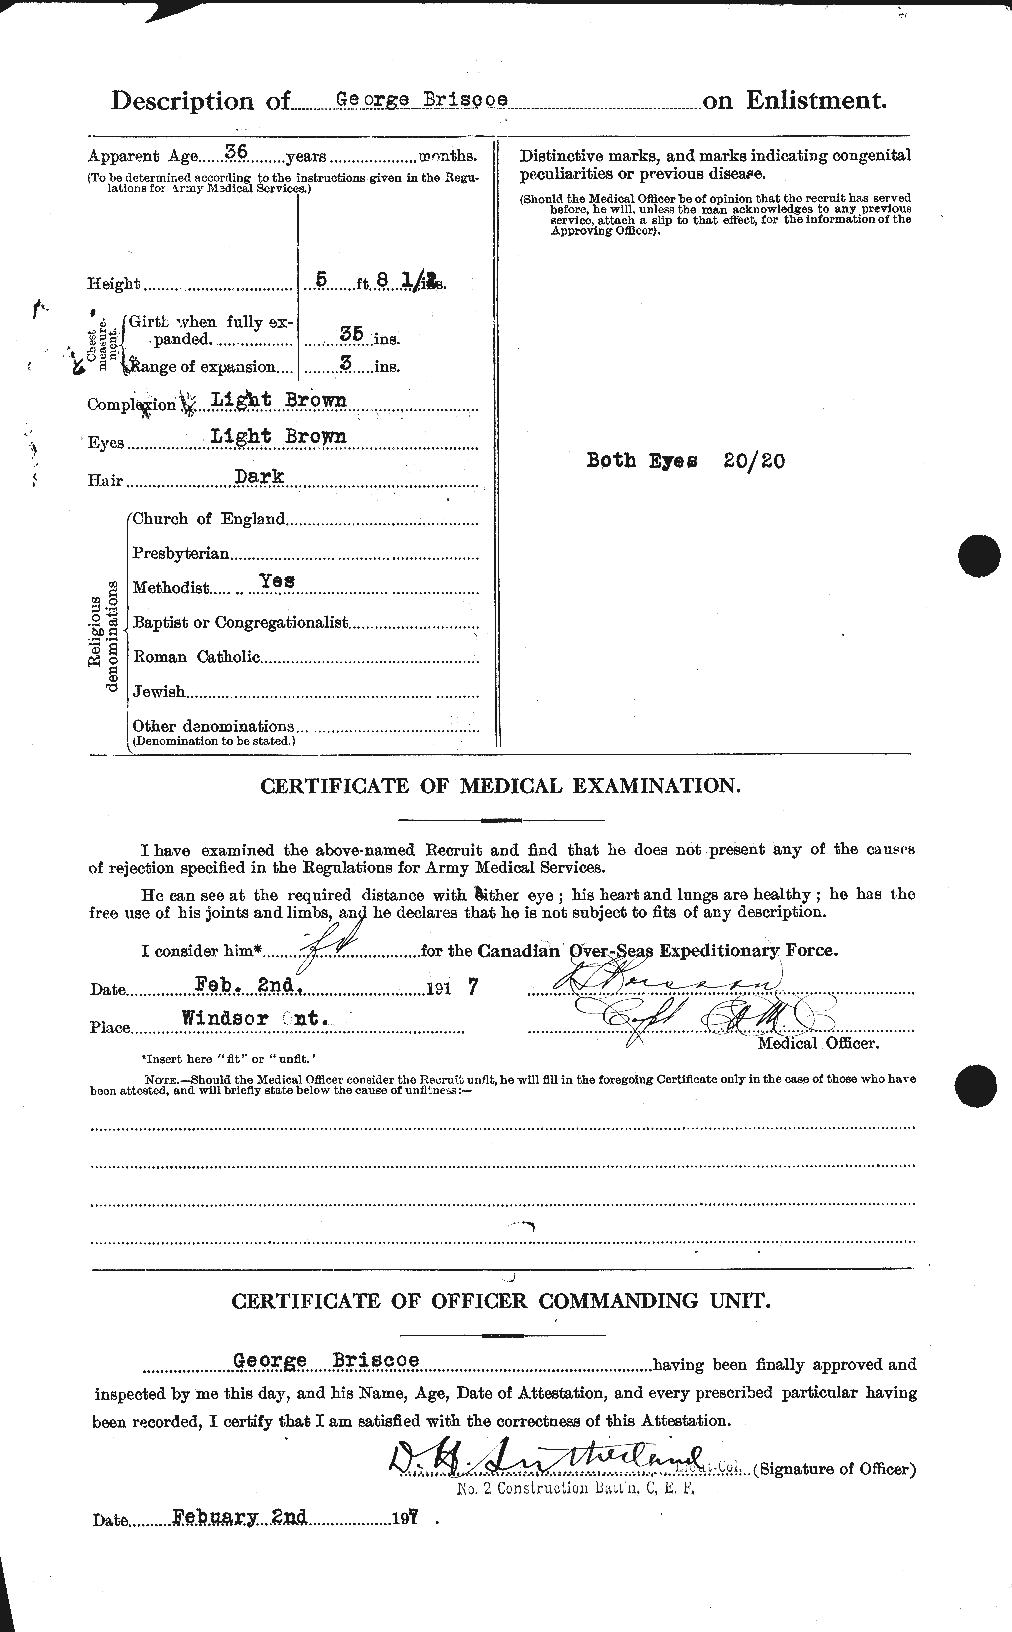 Personnel Records of the First World War - CEF 259472b